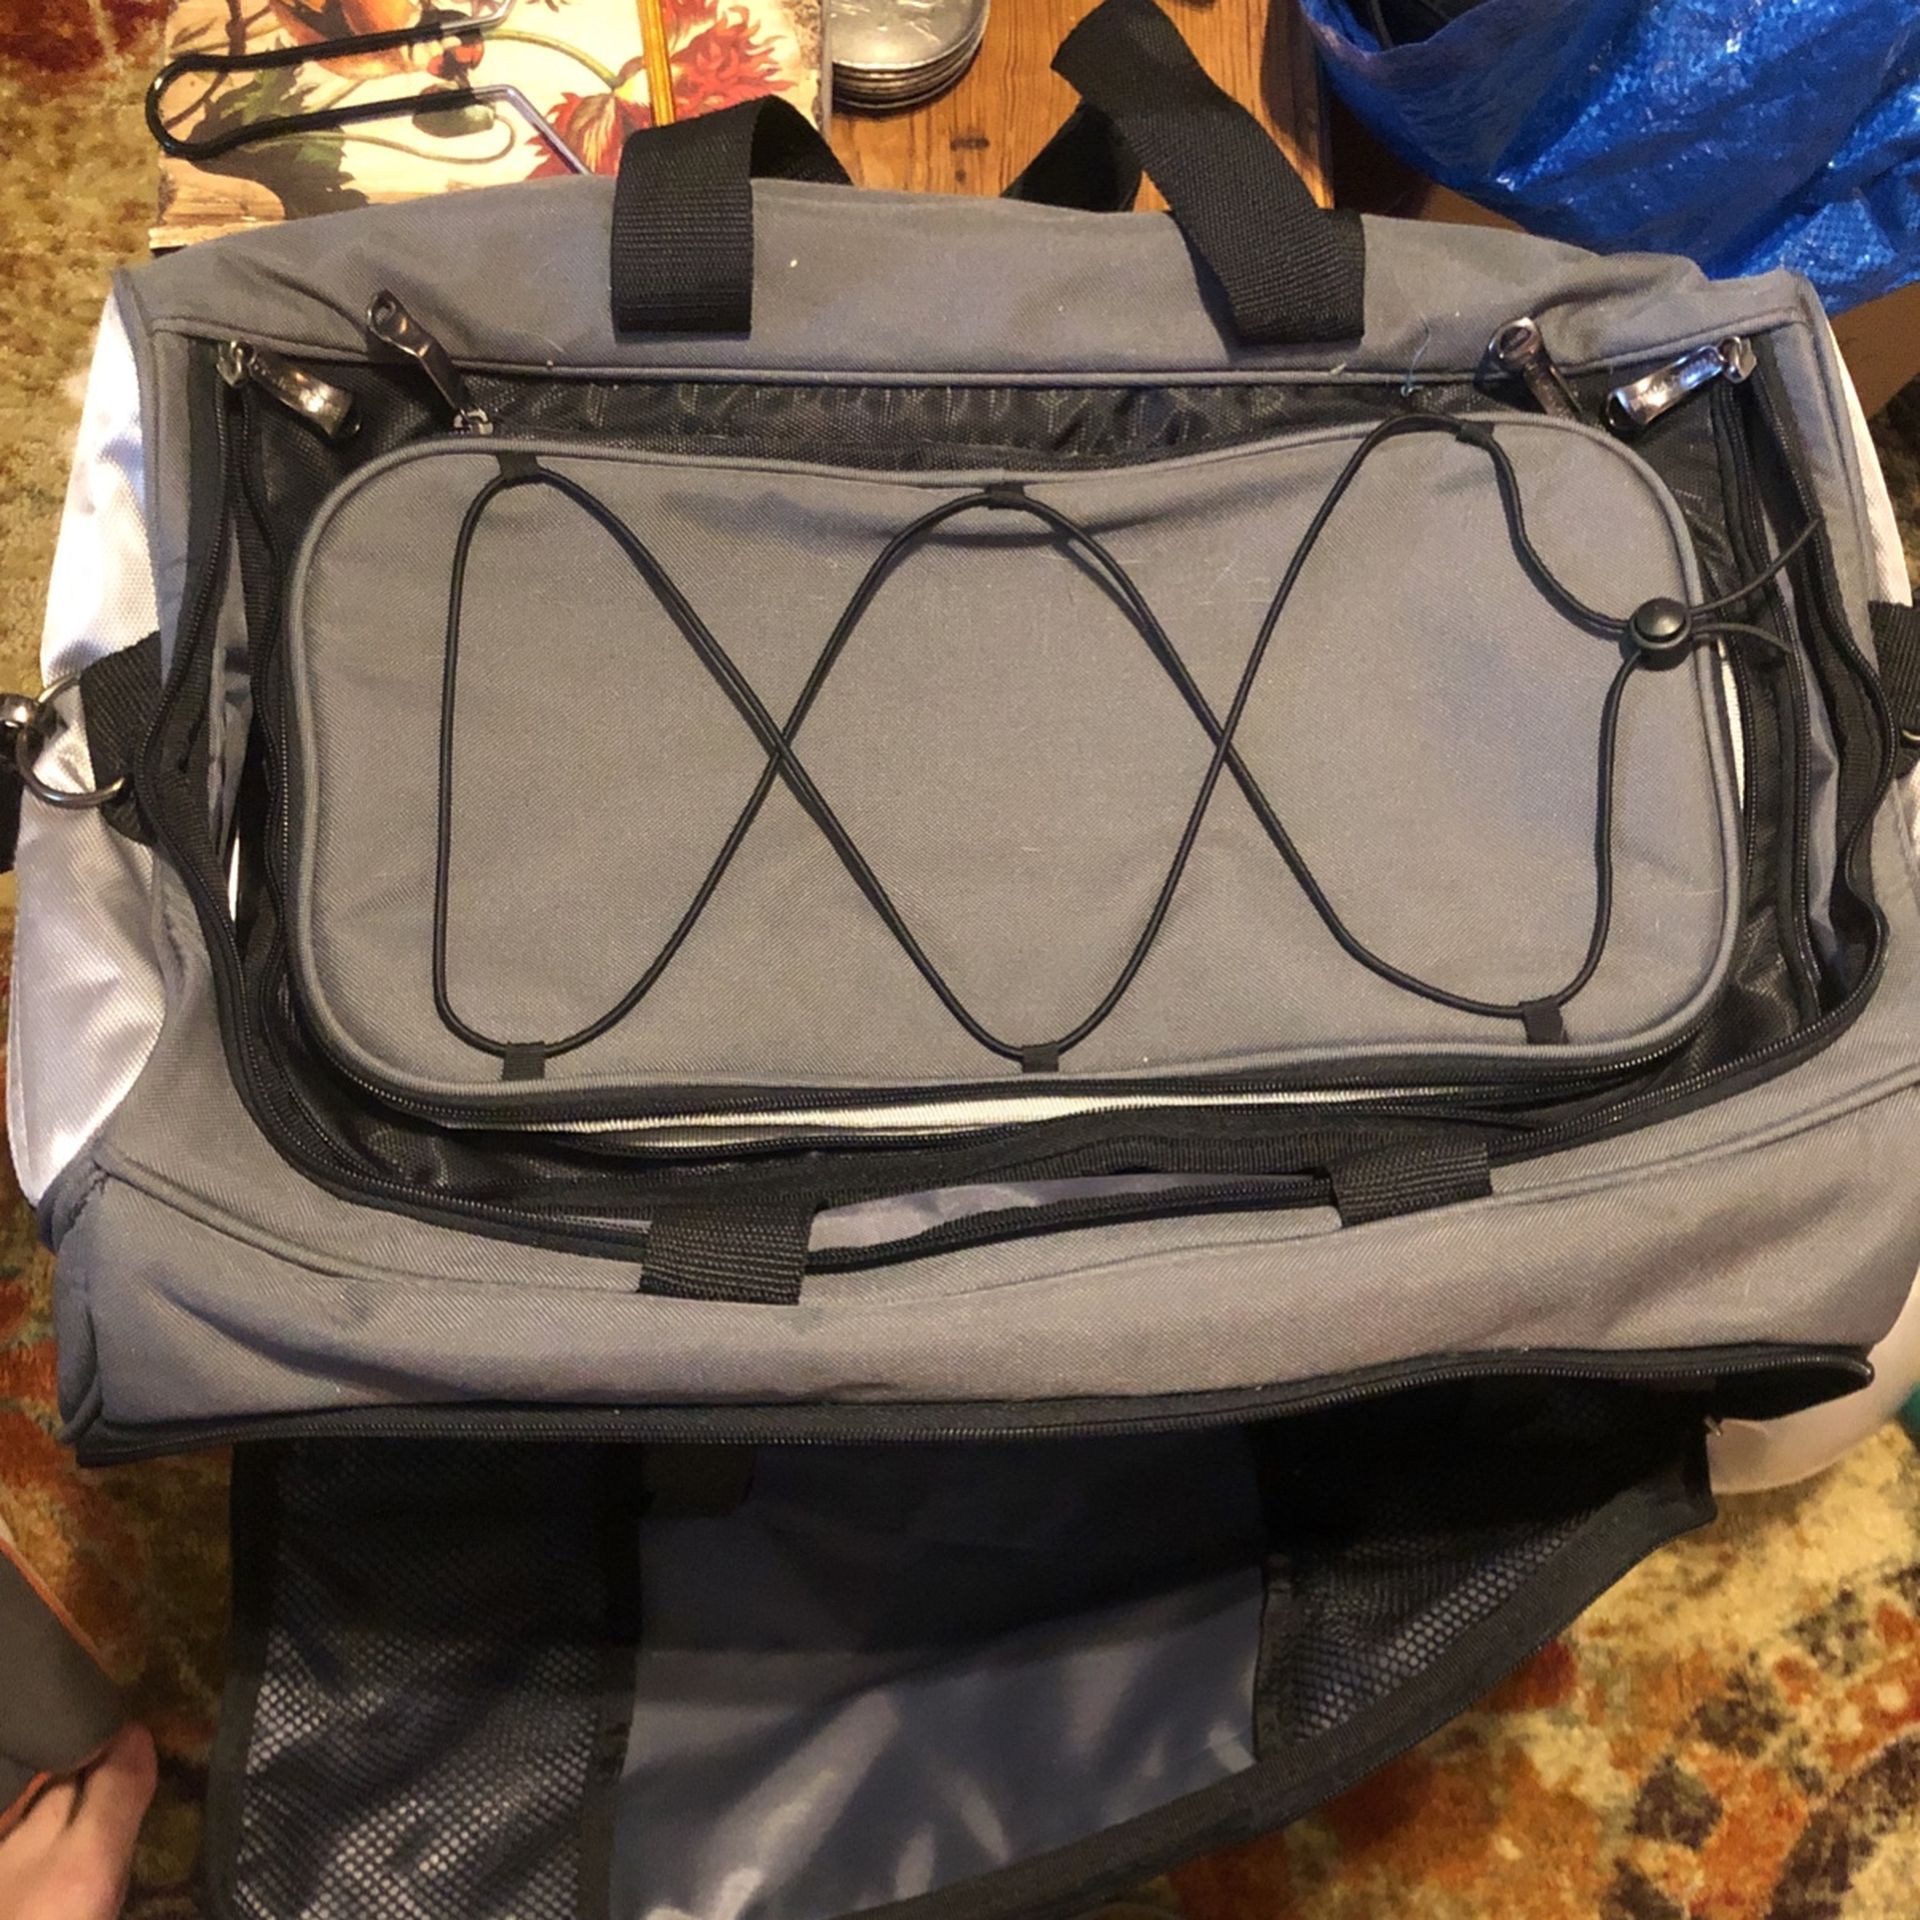 Coleman charcoal grill Bag With Cooler NWOT